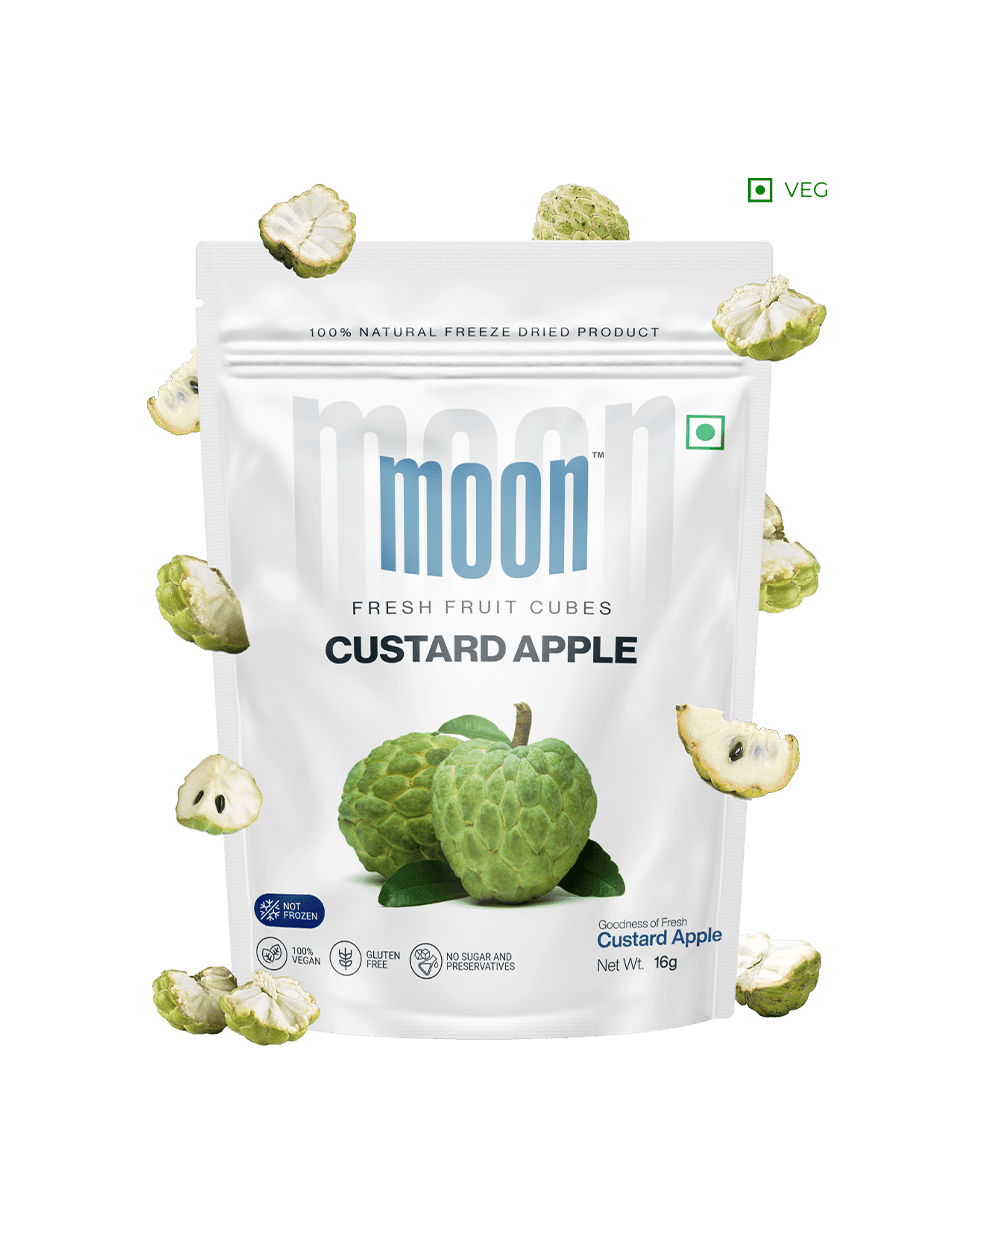 Themoonstoreindia's Moon Freeze Dried Custard Apple Cubes offers a convenient and versatile way to enjoy the nutritional benefits of freeze-dried custard apple cubes. Made from real custard apples, this powder captures the natural flavor and essence.